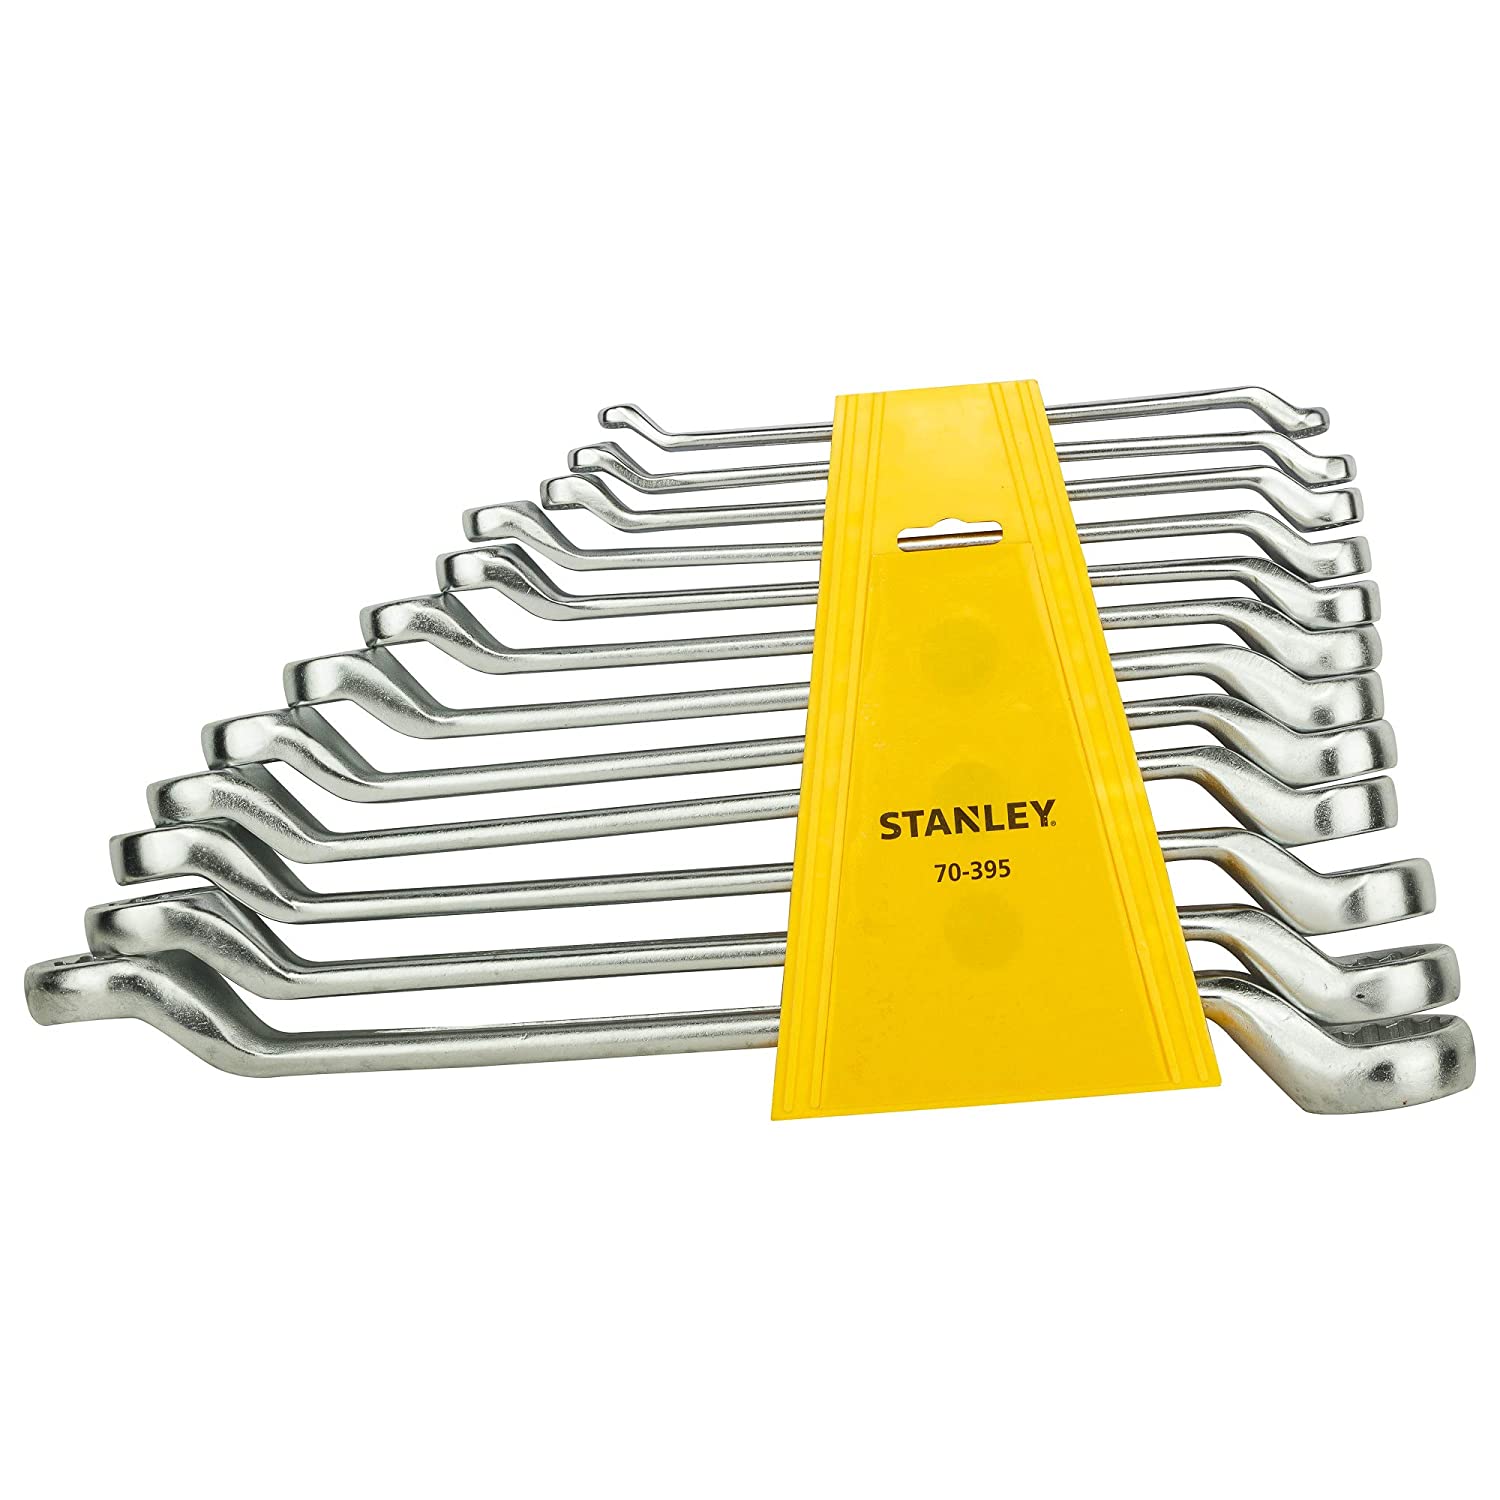 STANLEY 70-395E Shallow Offset Ring End Spanner Set (Pack Of 12)